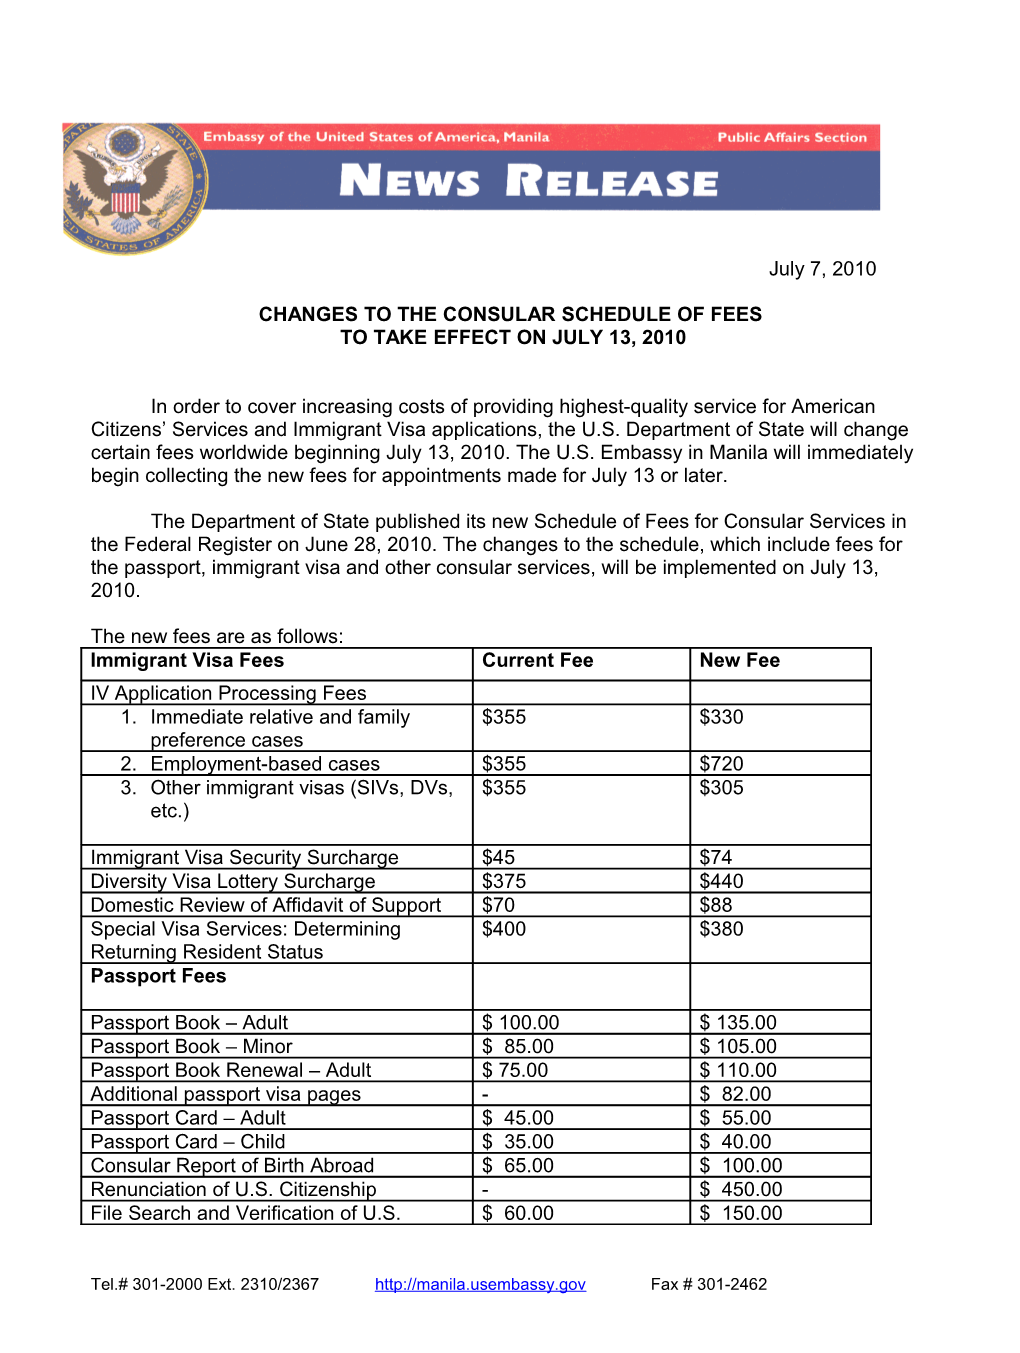 Changes to the Consular Schedule of Fees